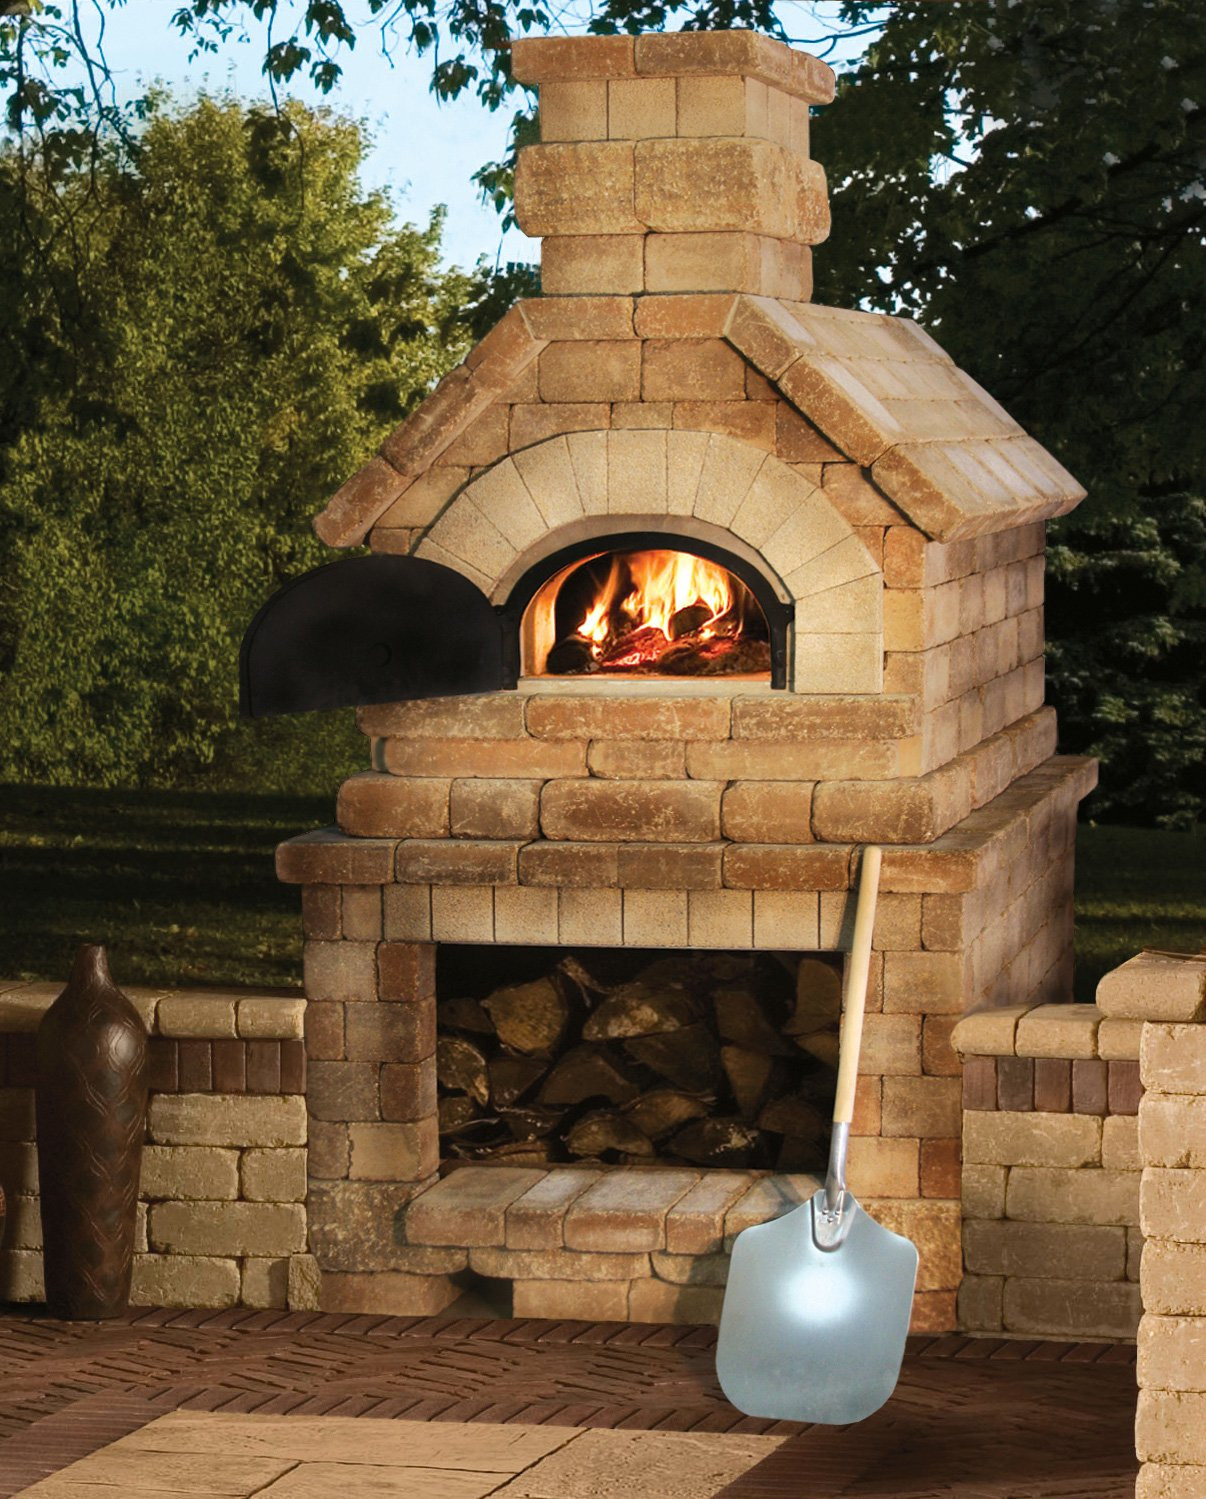 Outdoor Oven DIY
 CBO 750 DIY Wood Fired Oven Kit